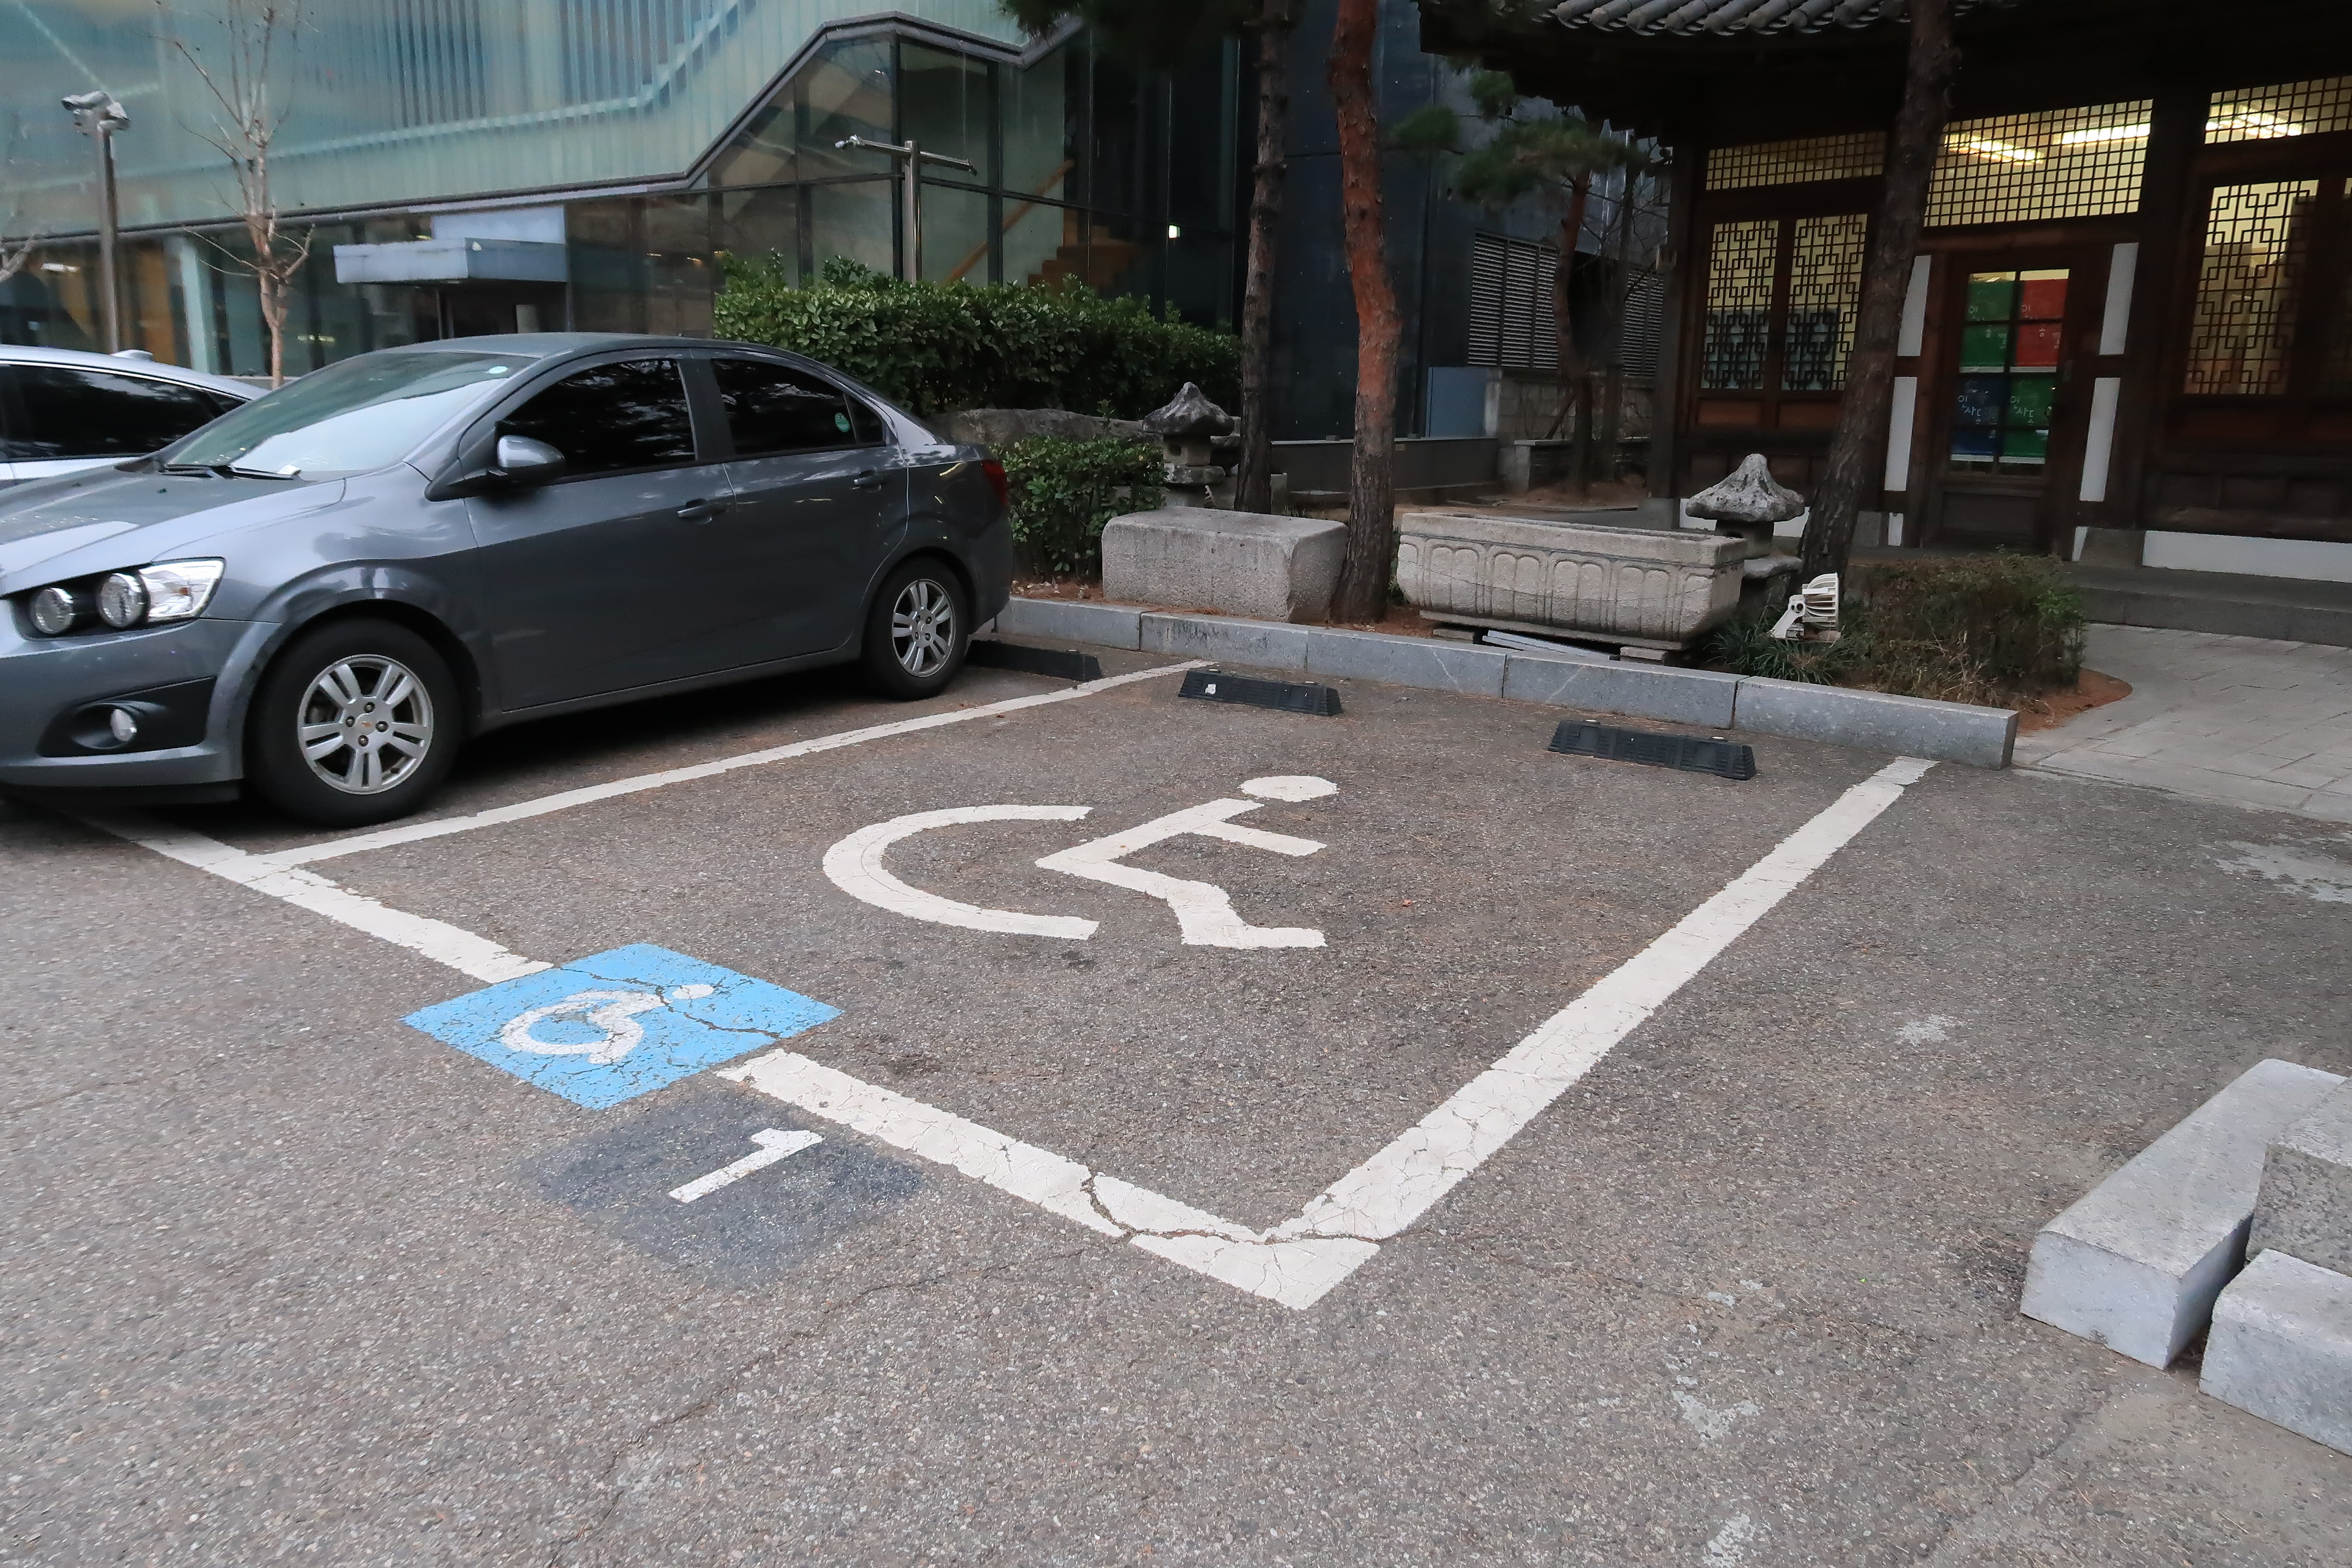 Parking facilities for persons with disabilities0 : Parking facilities for persons with disabilities of Ssamzigil